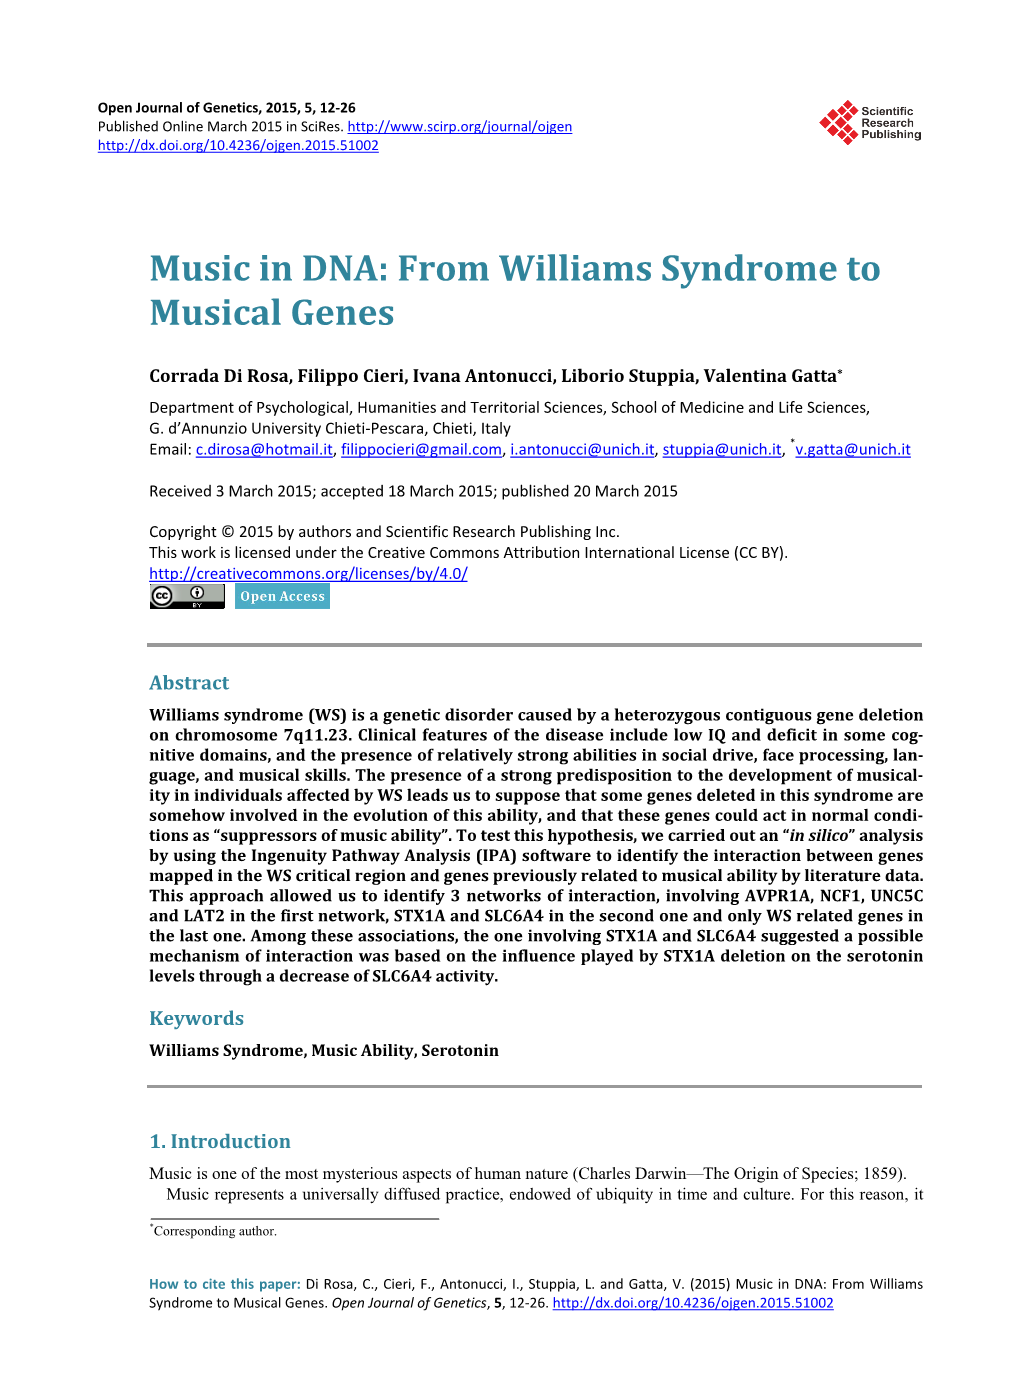 From Williams Syndrome to Musical Genes